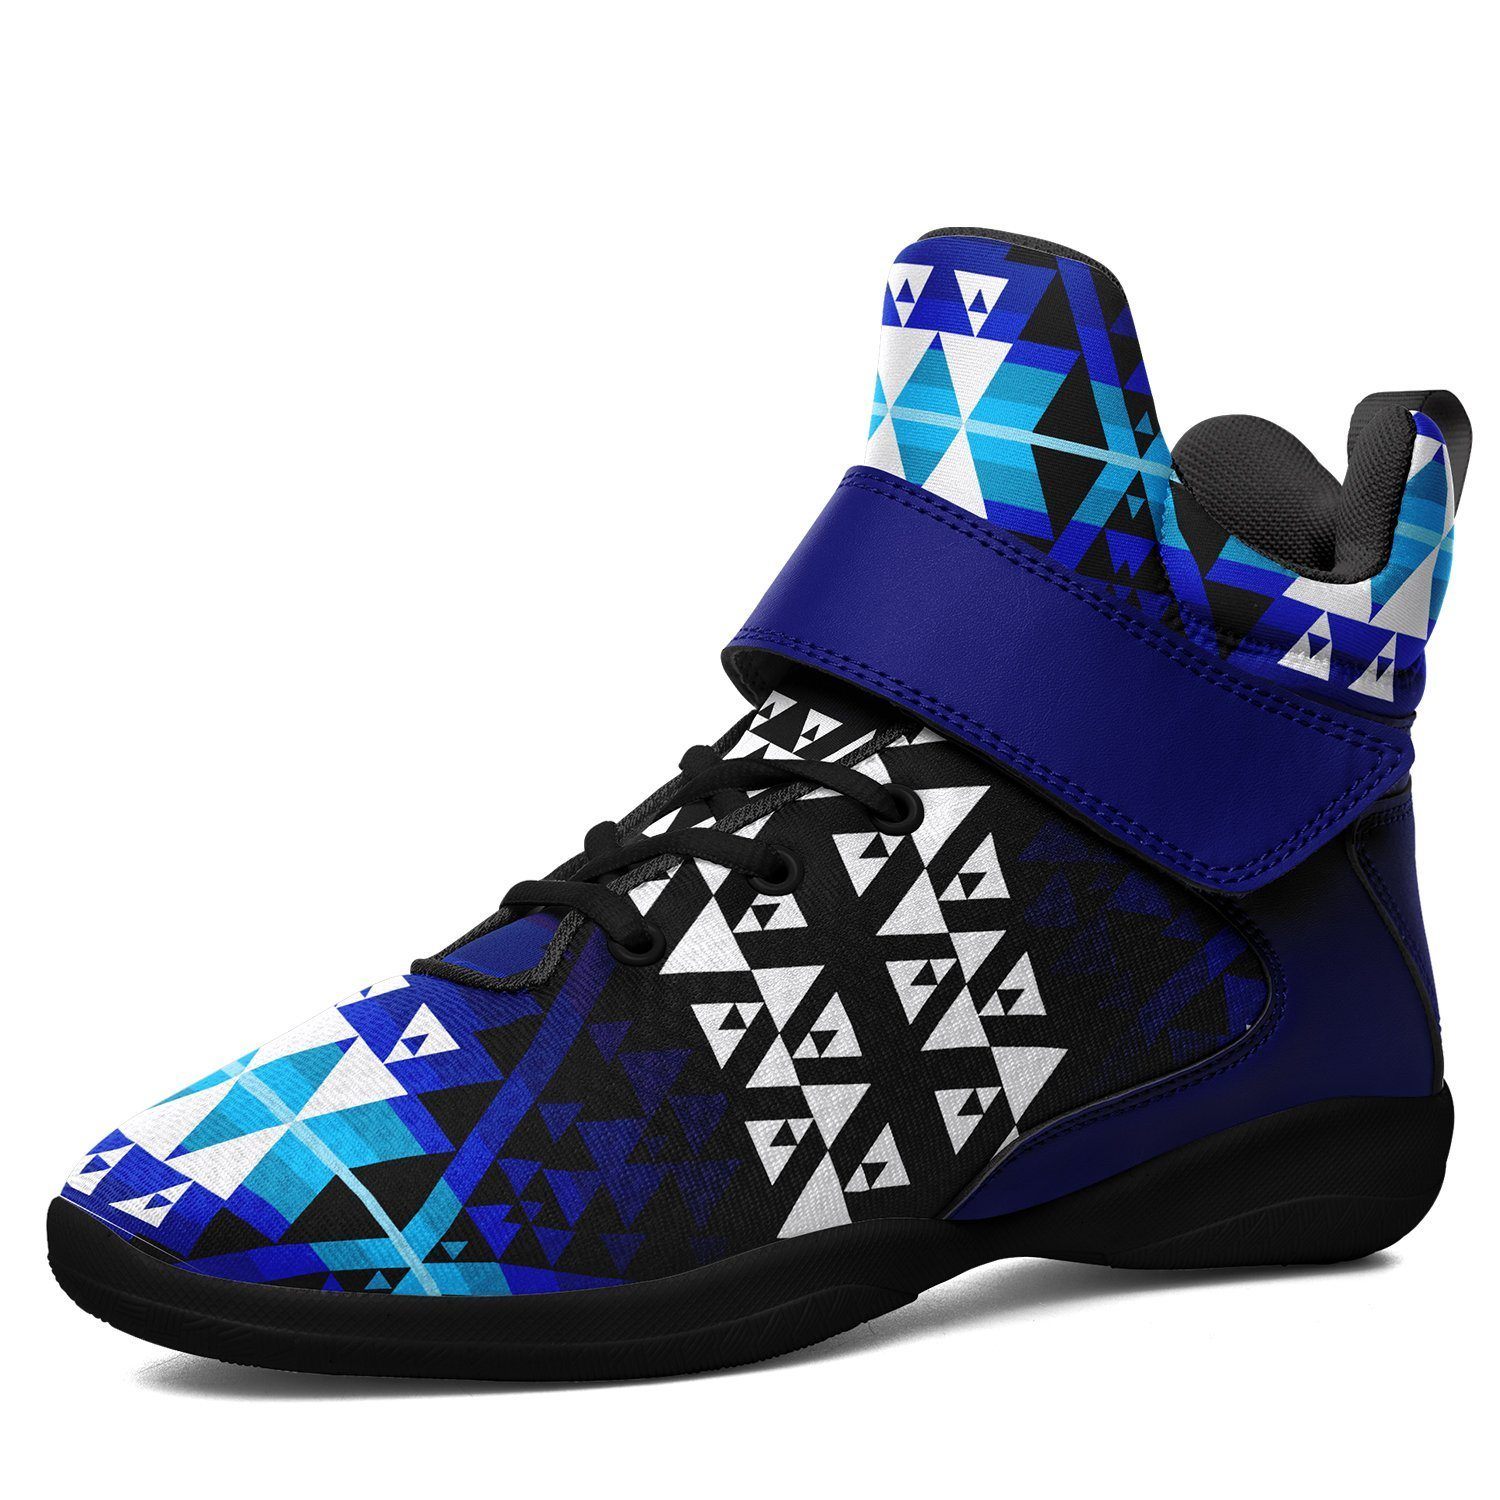 Writing on Stone Night Watch Ipottaa Basketball / Sport High Top Shoes - Black Sole 49 Dzine US Men 7 / EUR 40 Black Sole with Blue Strap 